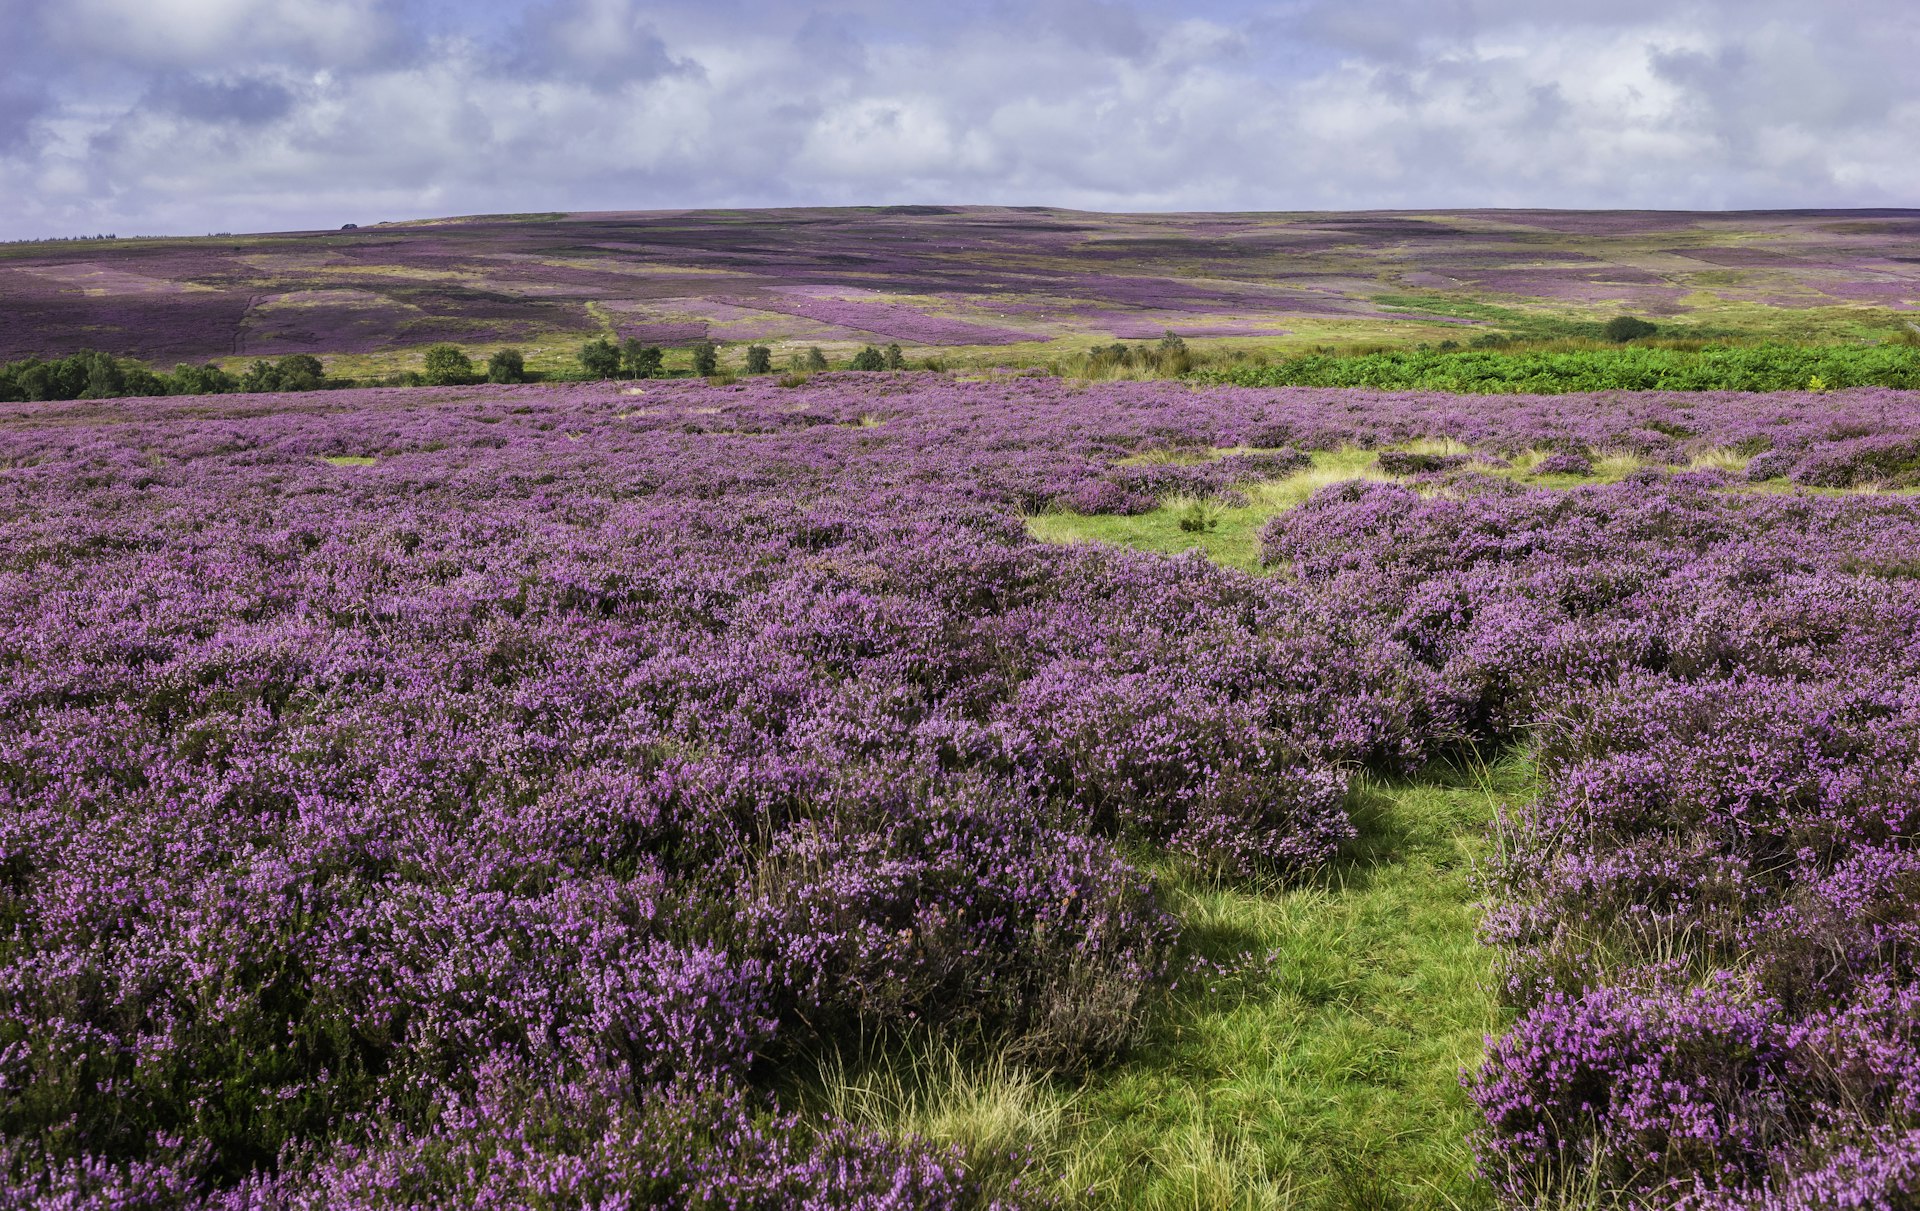 Purple heather covers the moorland landscape